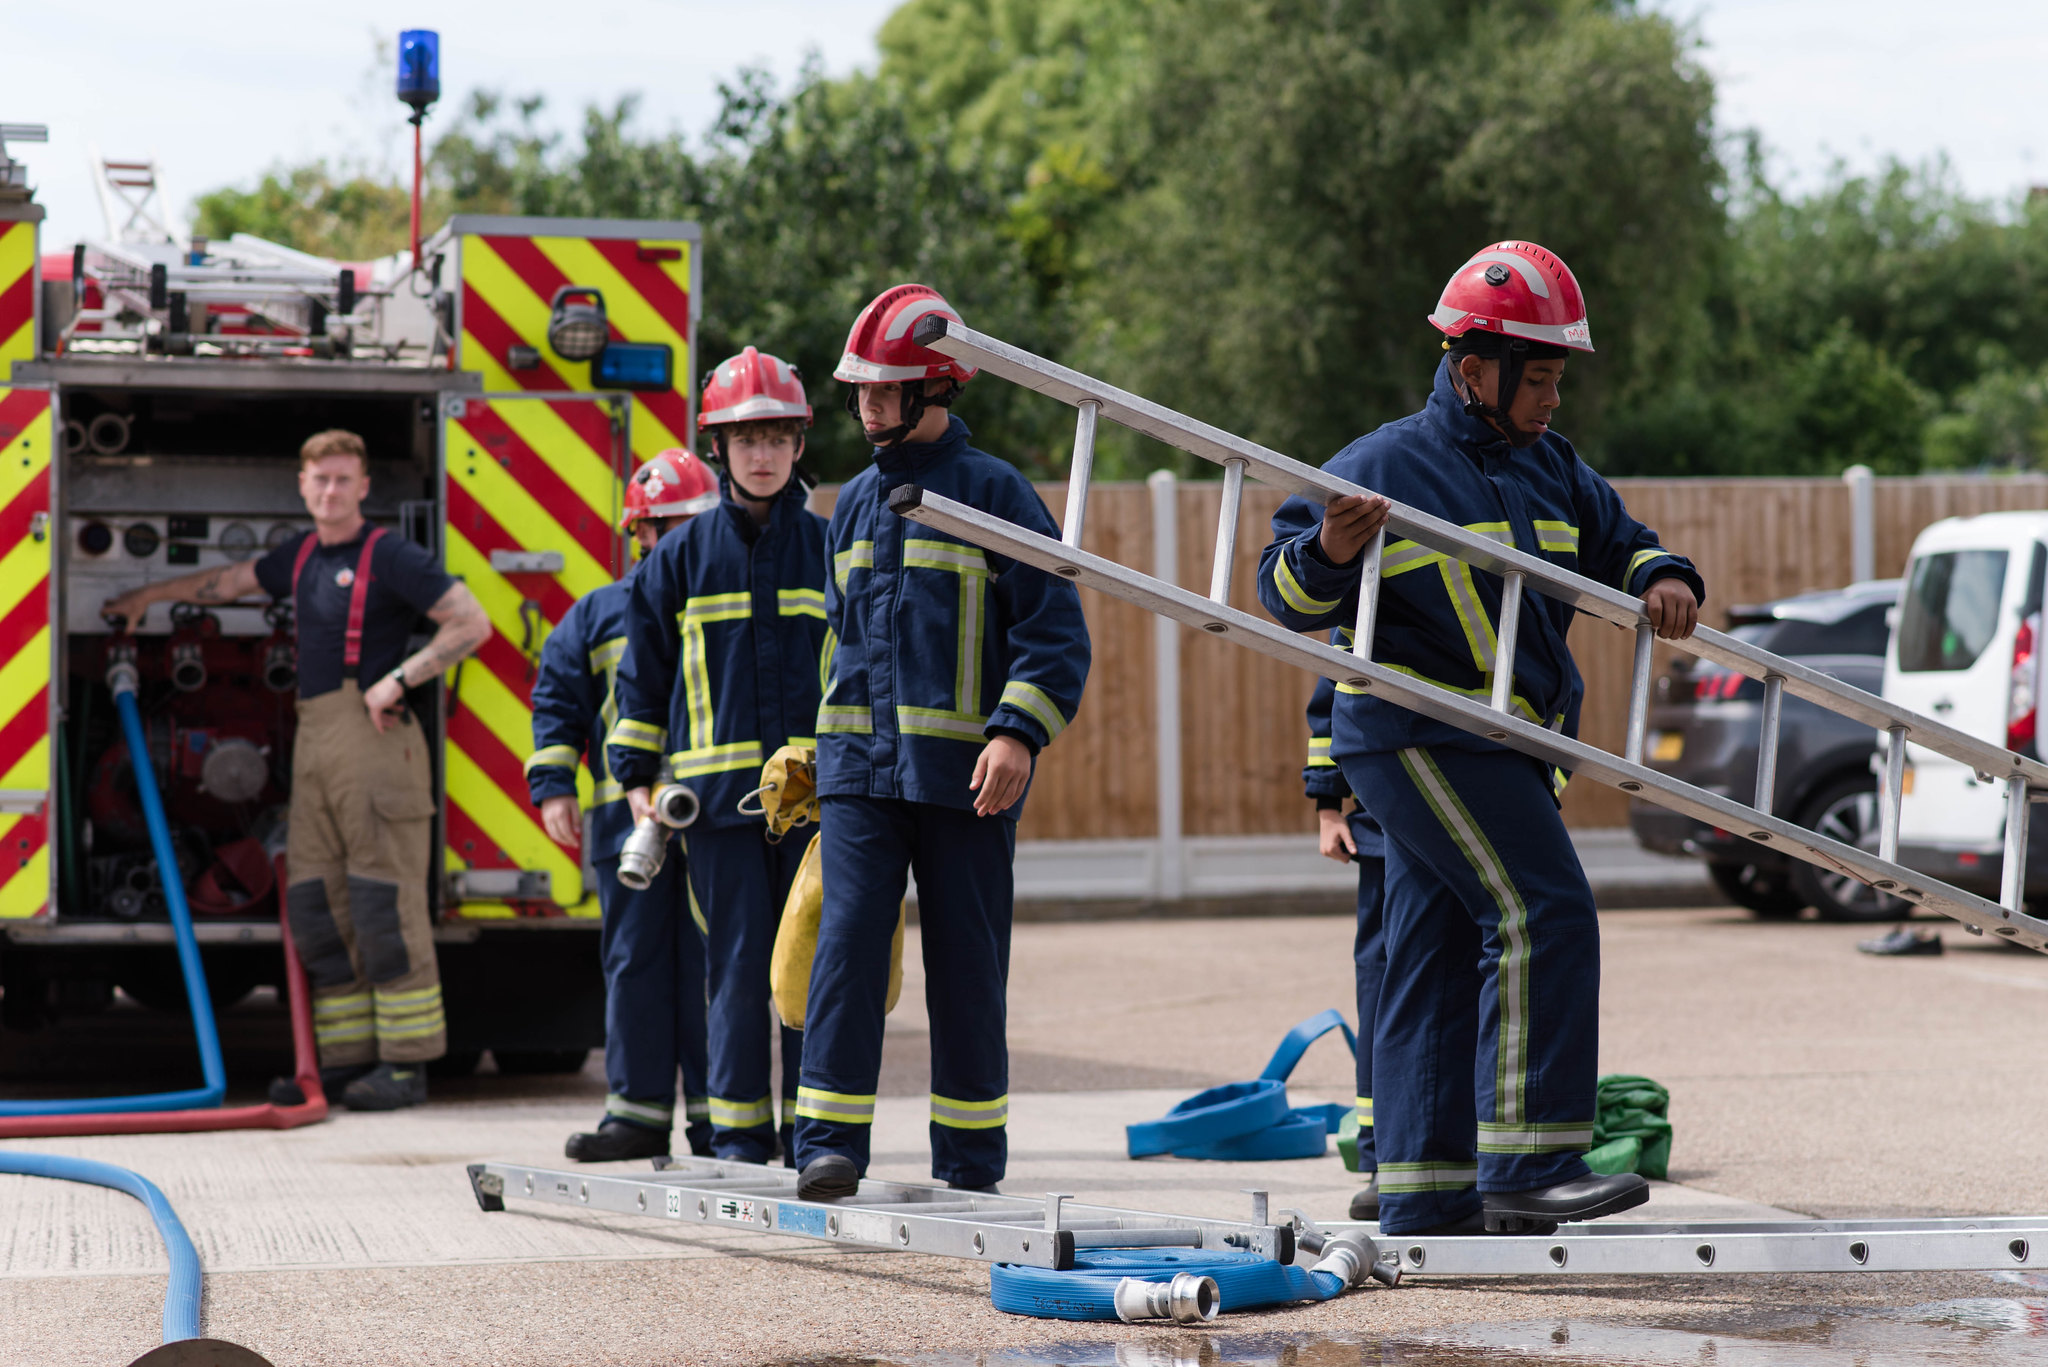 Four Fire Break participants, all boys in their teens, move a ladder across a forecourt at a fire station